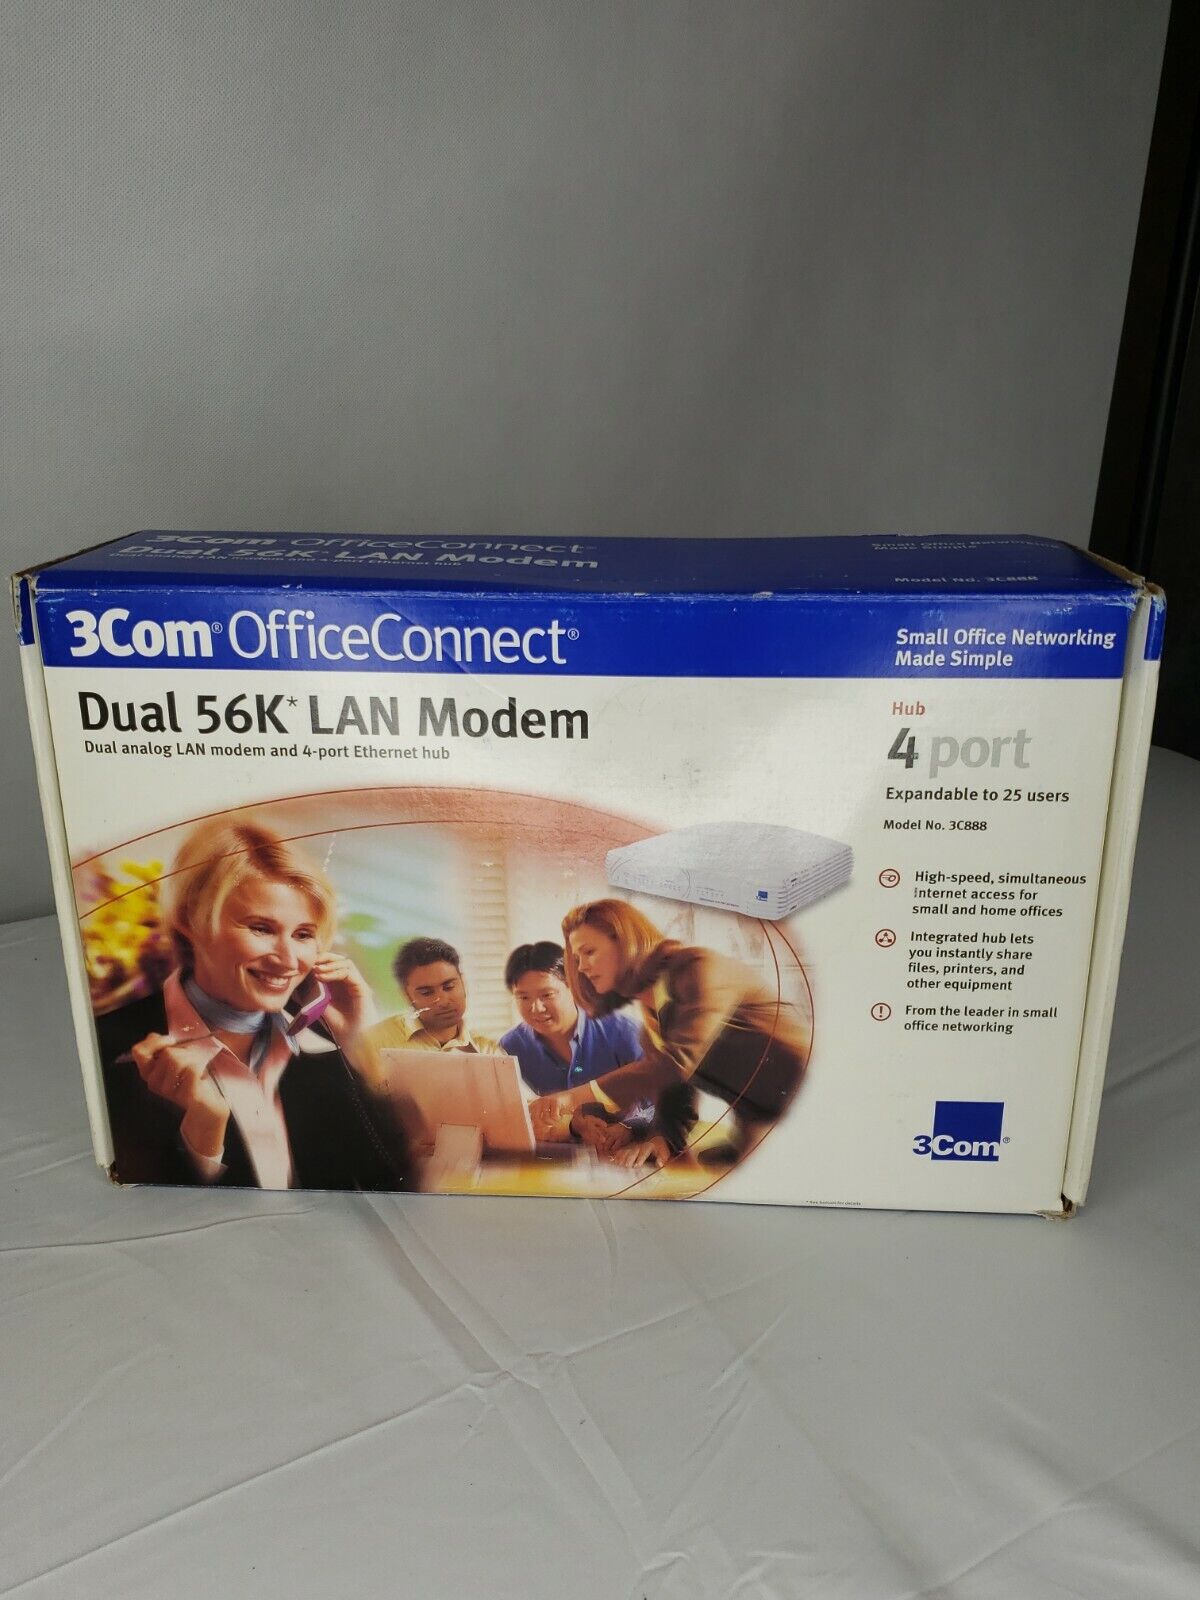 3Com OfficeConnect 56k LAN Modem 3C888. Hub 4 port expandable to 25 users .